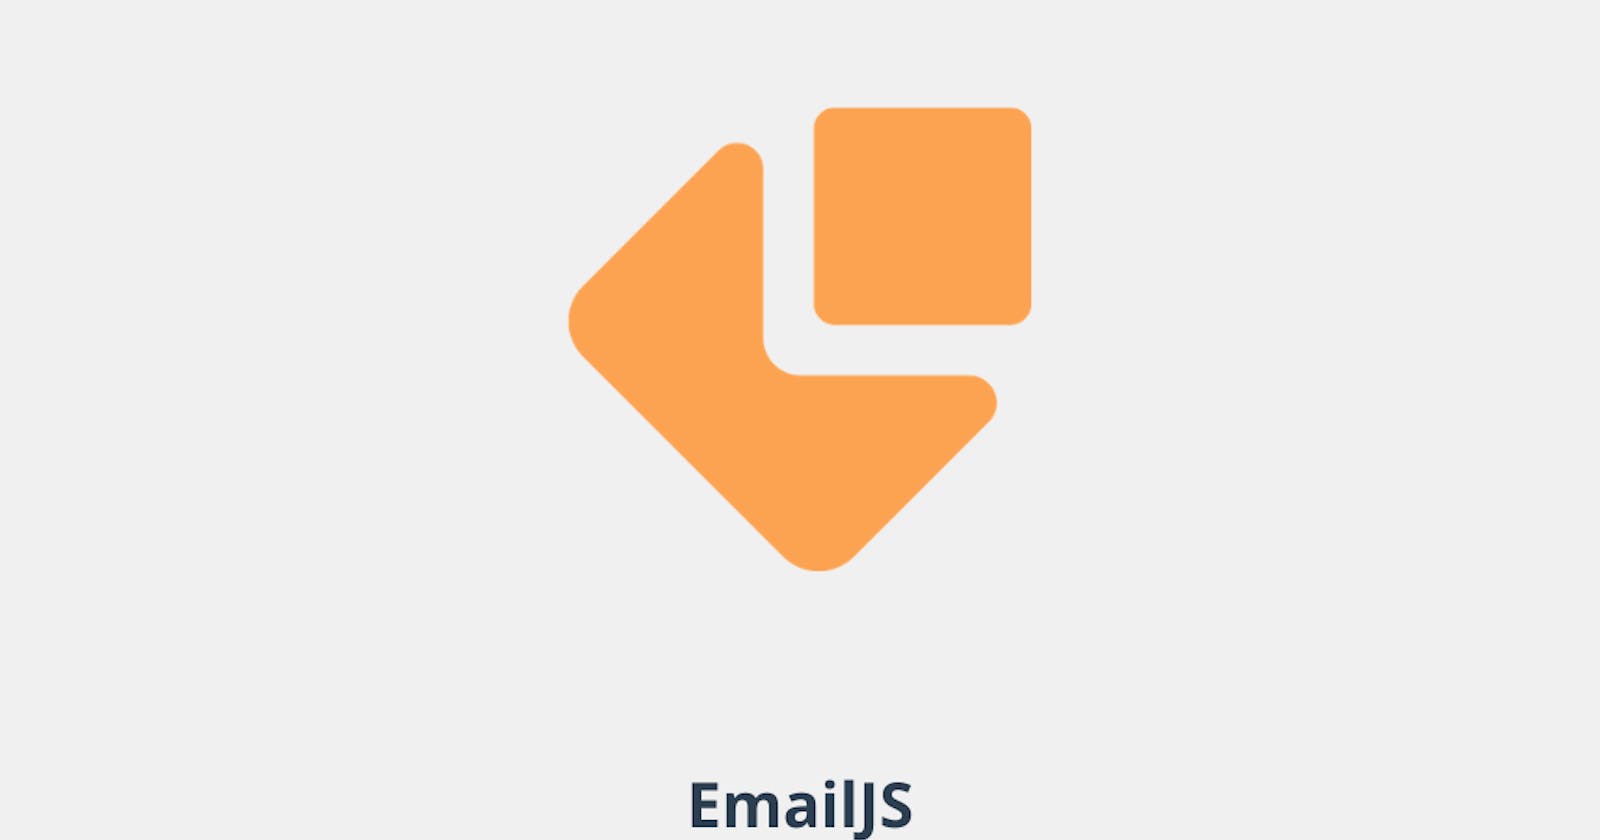 How to create a  Client-side -based Contact Form With Emailjs  service